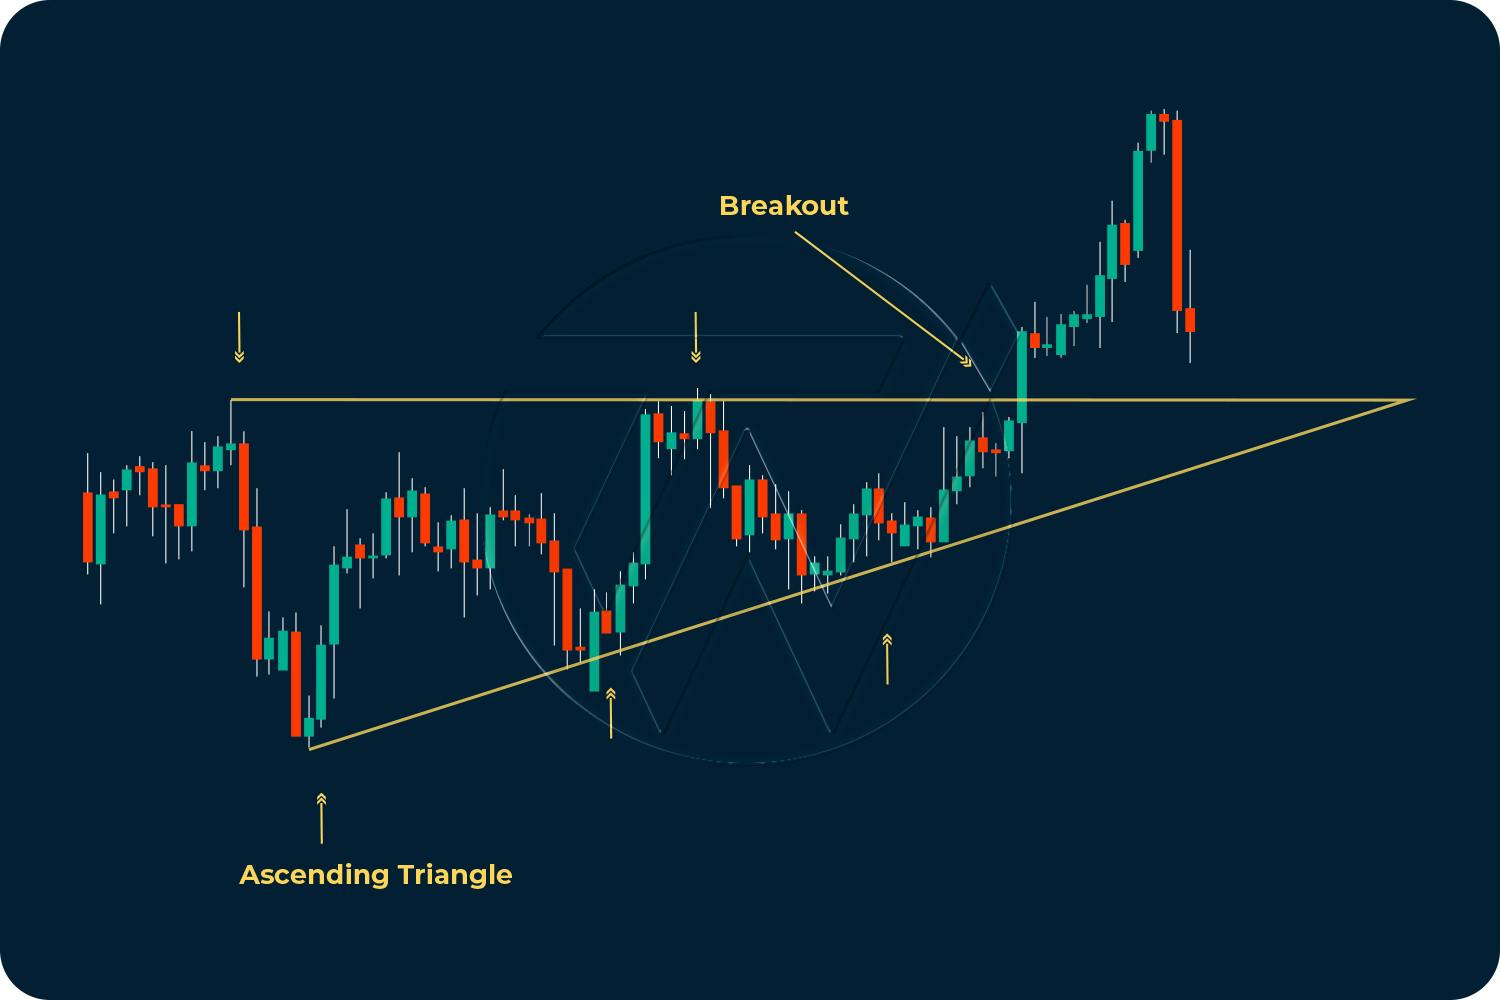 Candlestick chart patterns illustrating ascending triangle breakout